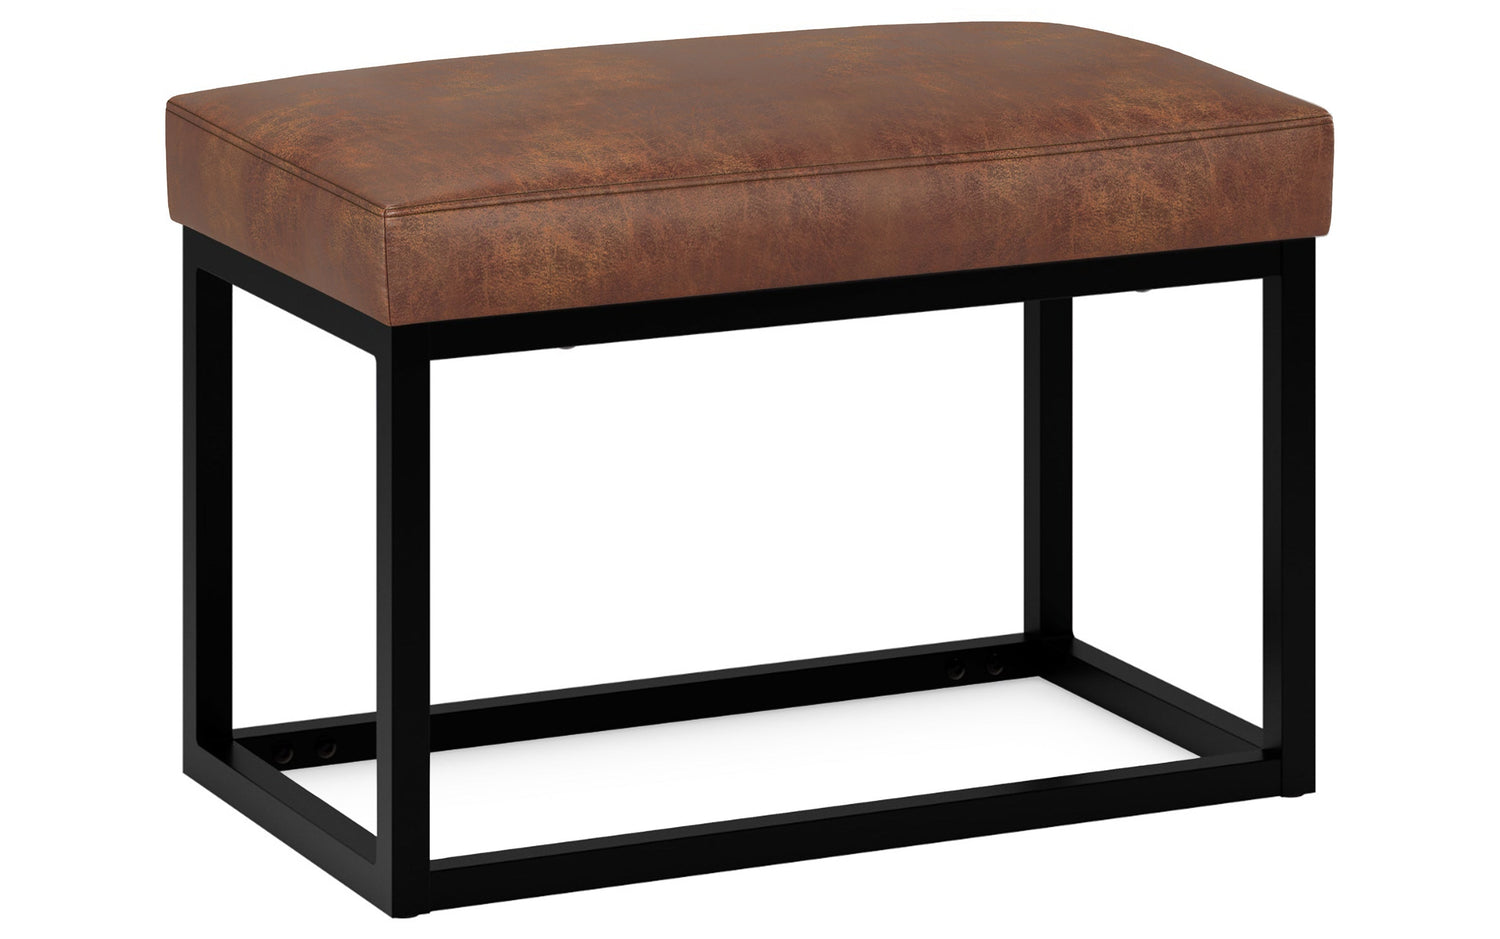 Distressed Saddle Brown | Reynolds Small Bench